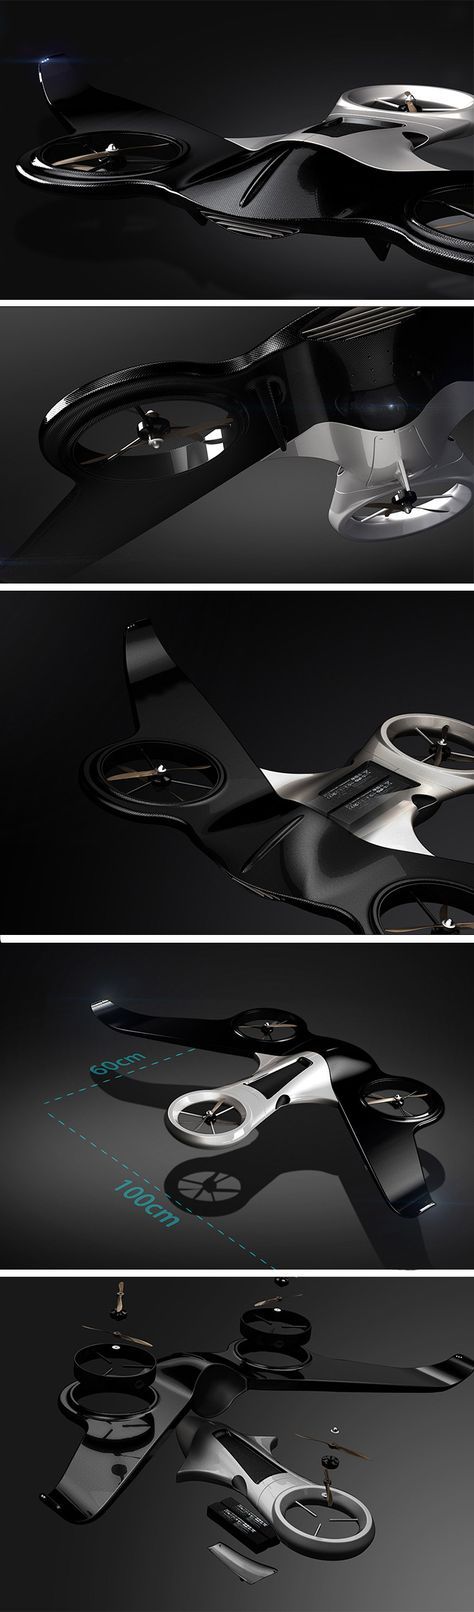 The Eagle Eye drone is a tricopter packed with powerful technologies to give wil...